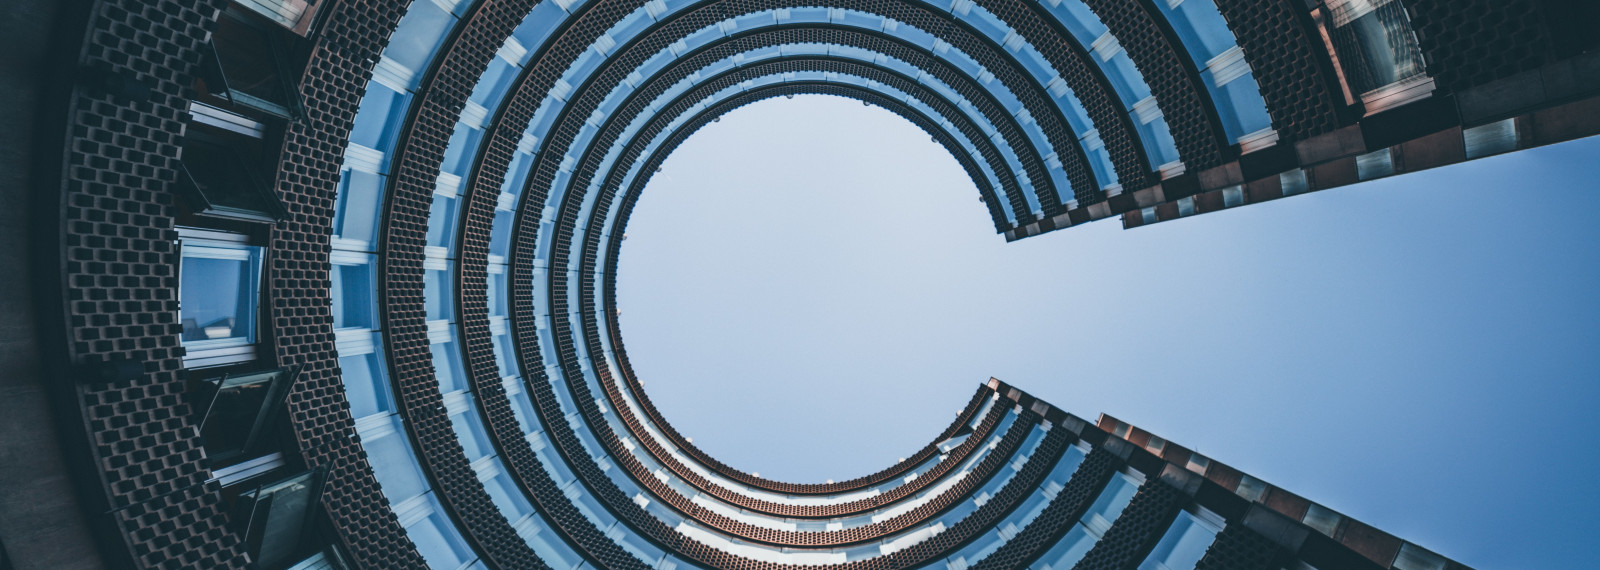 Image of looking up to the sky from within a circular building